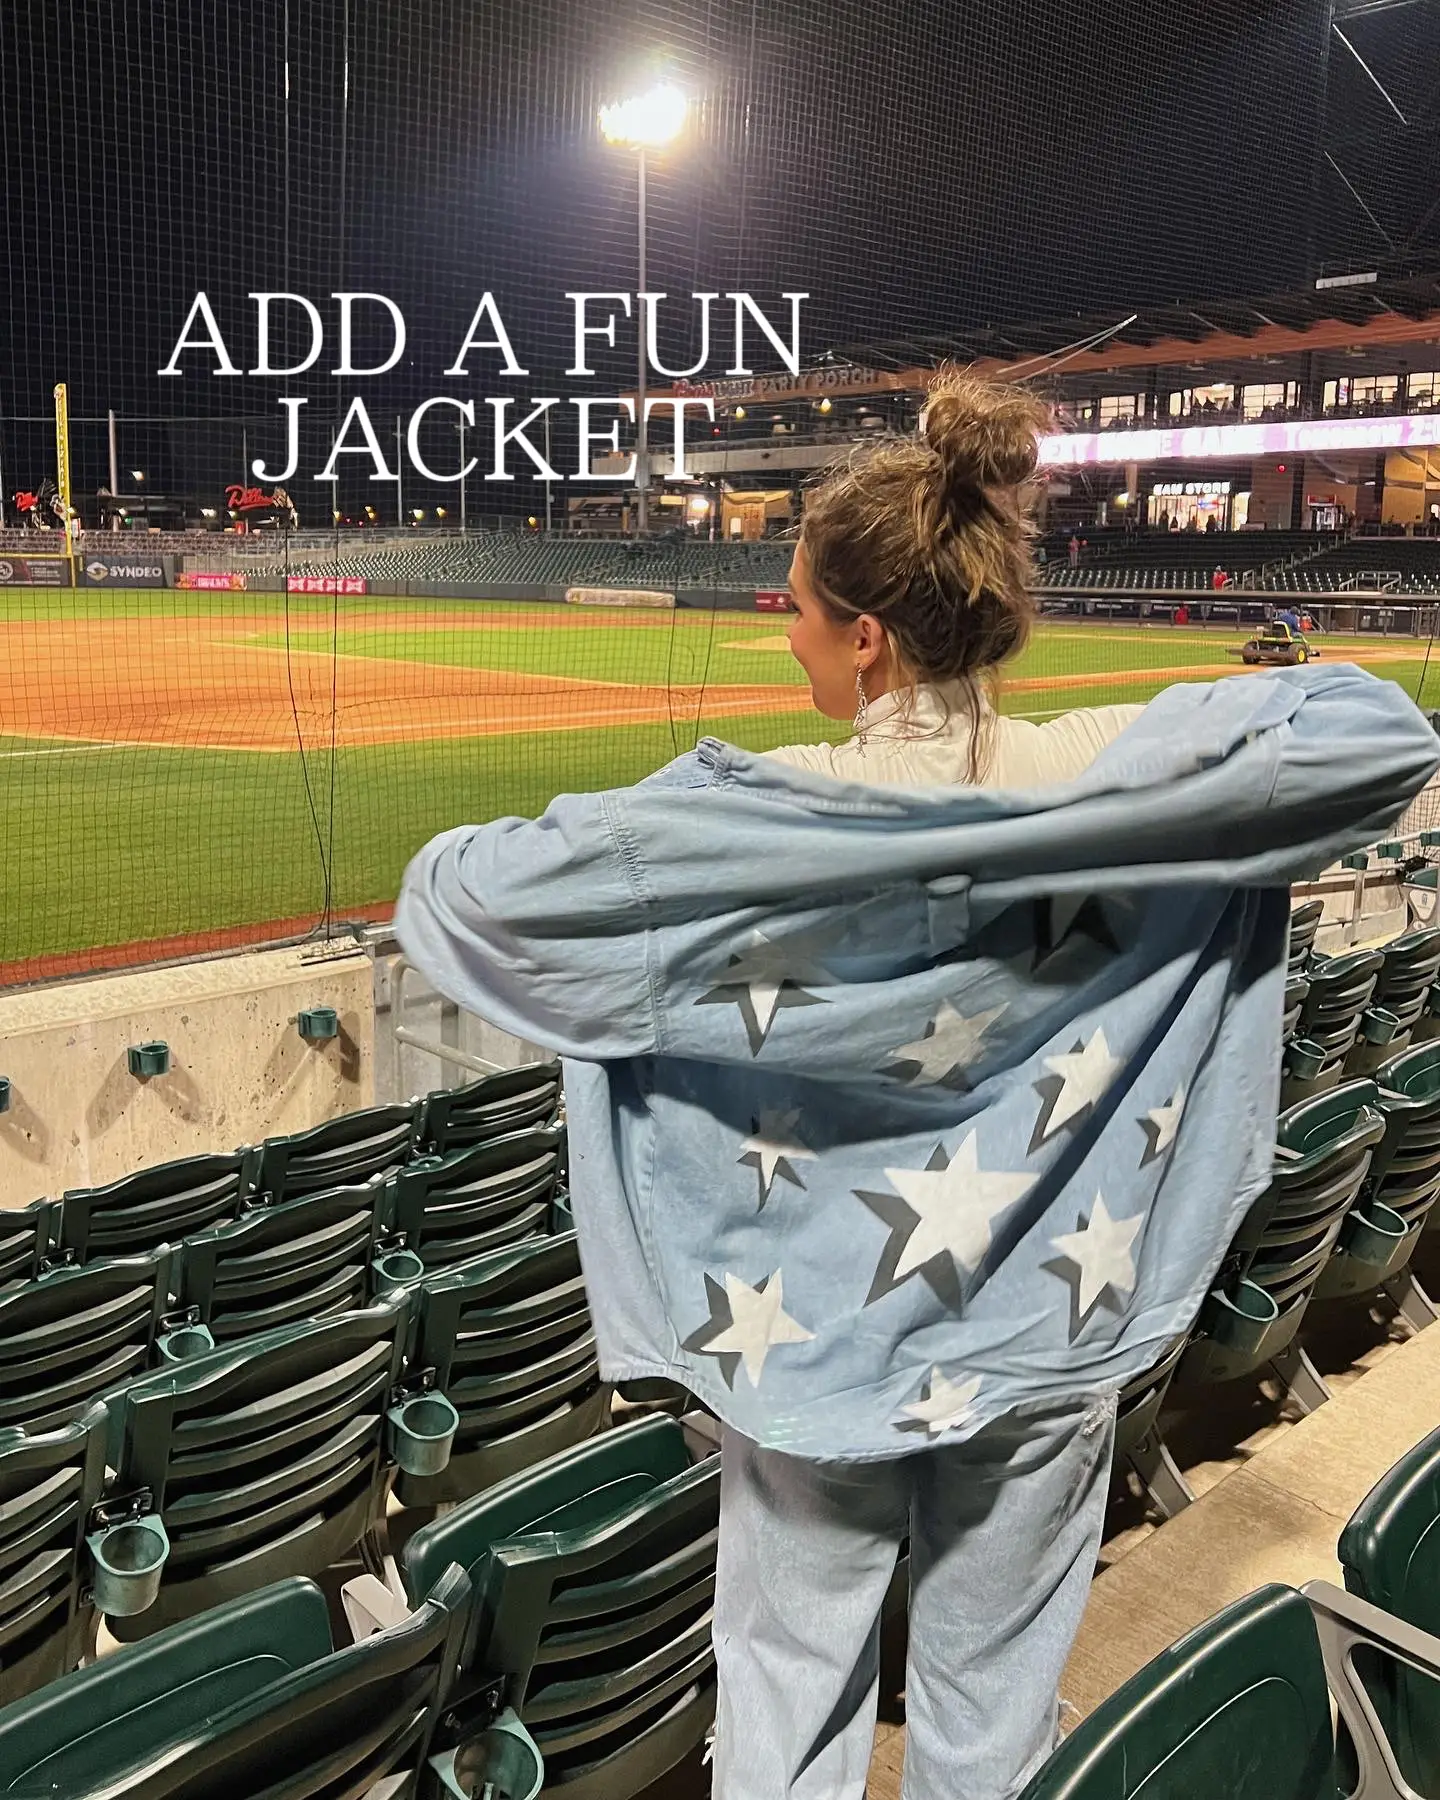 Cute outfit for a #baseball game!  Baseball game outfits, Gaming